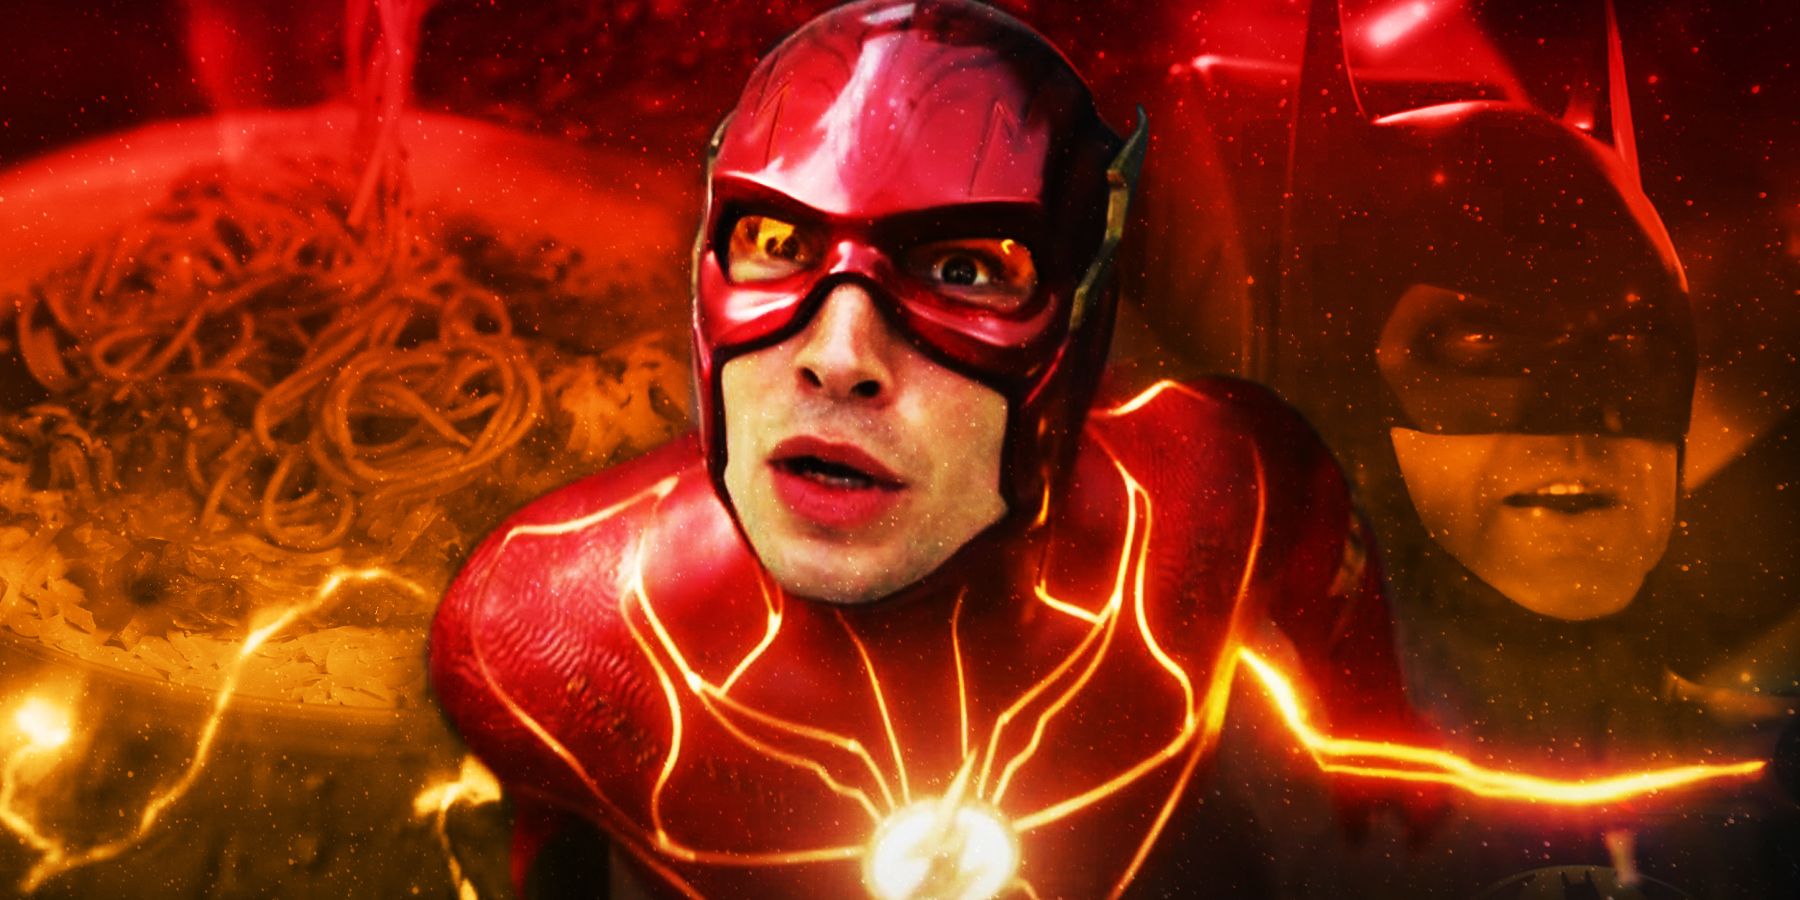 The Flash' Ending Explained - Does Barry Allen Fix the Multiverses?